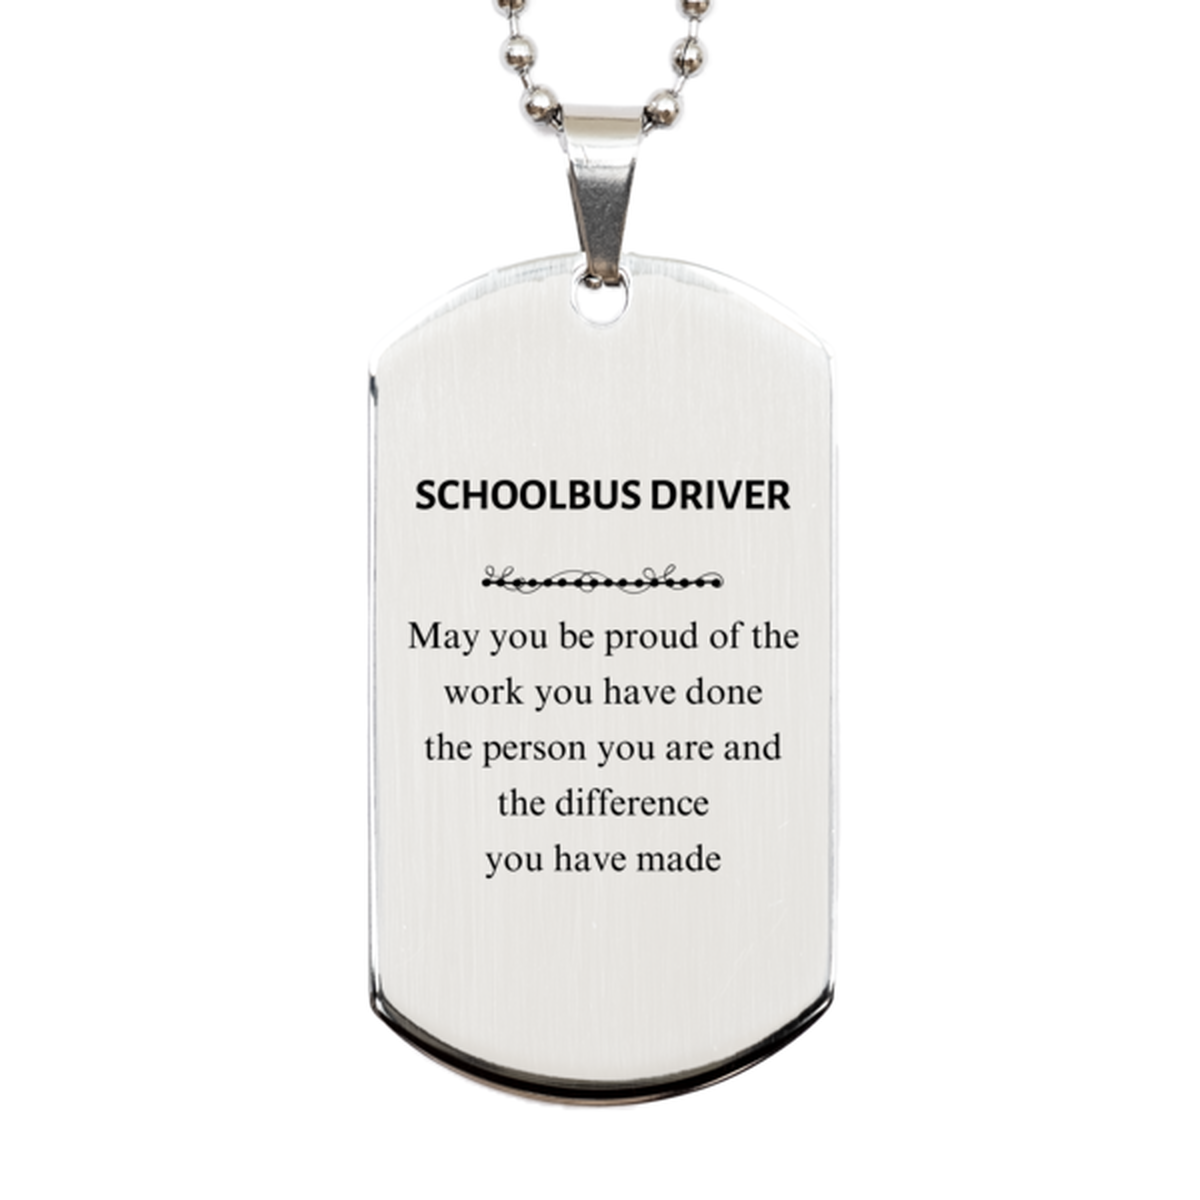 Schoolbus Driver May you be proud of the work you have done, Retirement Schoolbus Driver Silver Dog Tag for Colleague Appreciation Gifts Amazing for Schoolbus Driver